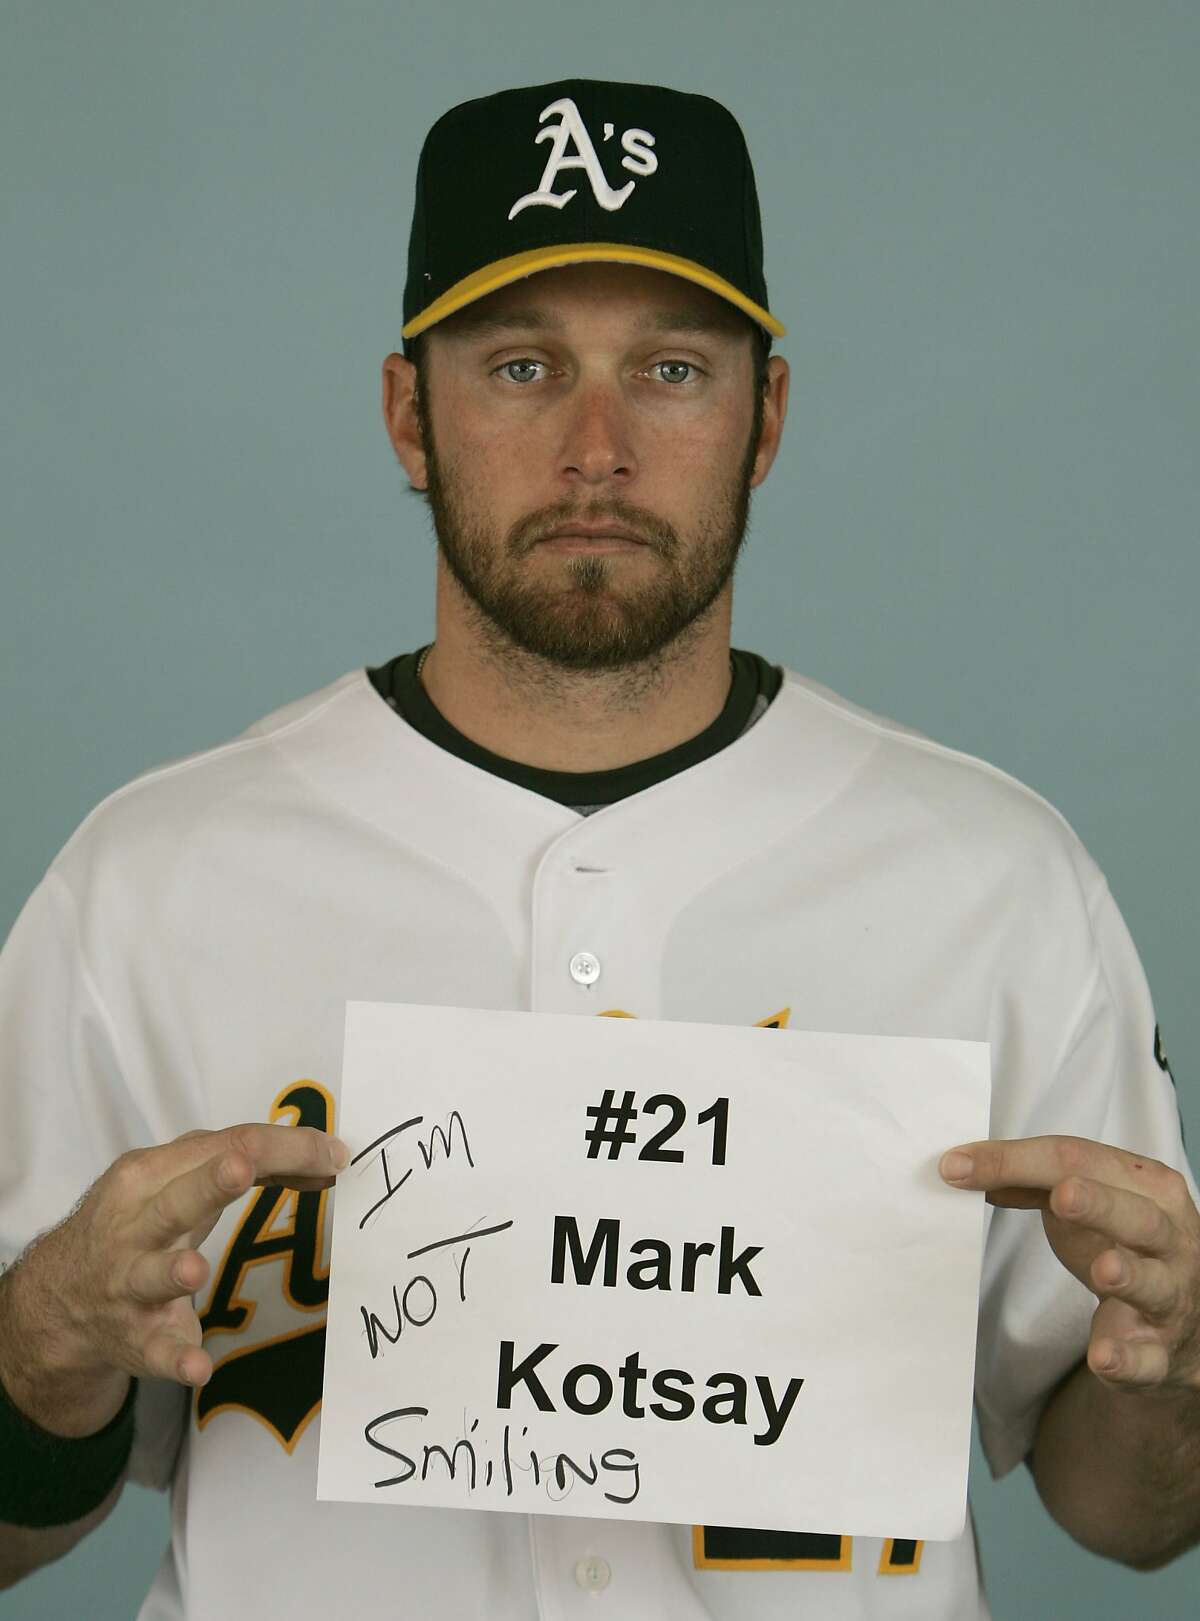 Oakland Athletics' outfielder Mark Kotsay holds up a name card saying he won't smile during picture day at spring training baseball in Phoenix, Saturday, Feb. 24, 2007. (AP Photo/Eric Risberg) Ran on: 03-08-2007 Mark Kotsay is scheduled to have surgery today for a back problem that has bothered him since 2003. Ran on: 03-08-2007 Mark Kotsay is scheduled to have surgery today for a back problem that has bothered him since 2003. Ran on: 03-08-2007 Ran on: 06-01-2007 Mark Kotsay returns to the A's today after having back surgery in March. Ran on: 06-01-2007 Mark Kotsay returns to the A's today after having back surgery in March. Ran on: 09-01-2007 Eric Chavez's shoulder has apparently been bugging him for a couple of years. _________________ Ran on: 09-01-2007 Eric Chavez's shoulder has apparently been bugging him for a couple of years. _________________ Ran on: 01-15-2008 Mark Kotsay says he'll always remember his Division Series against the Twins in 2006. Ran on: 01-15-2008